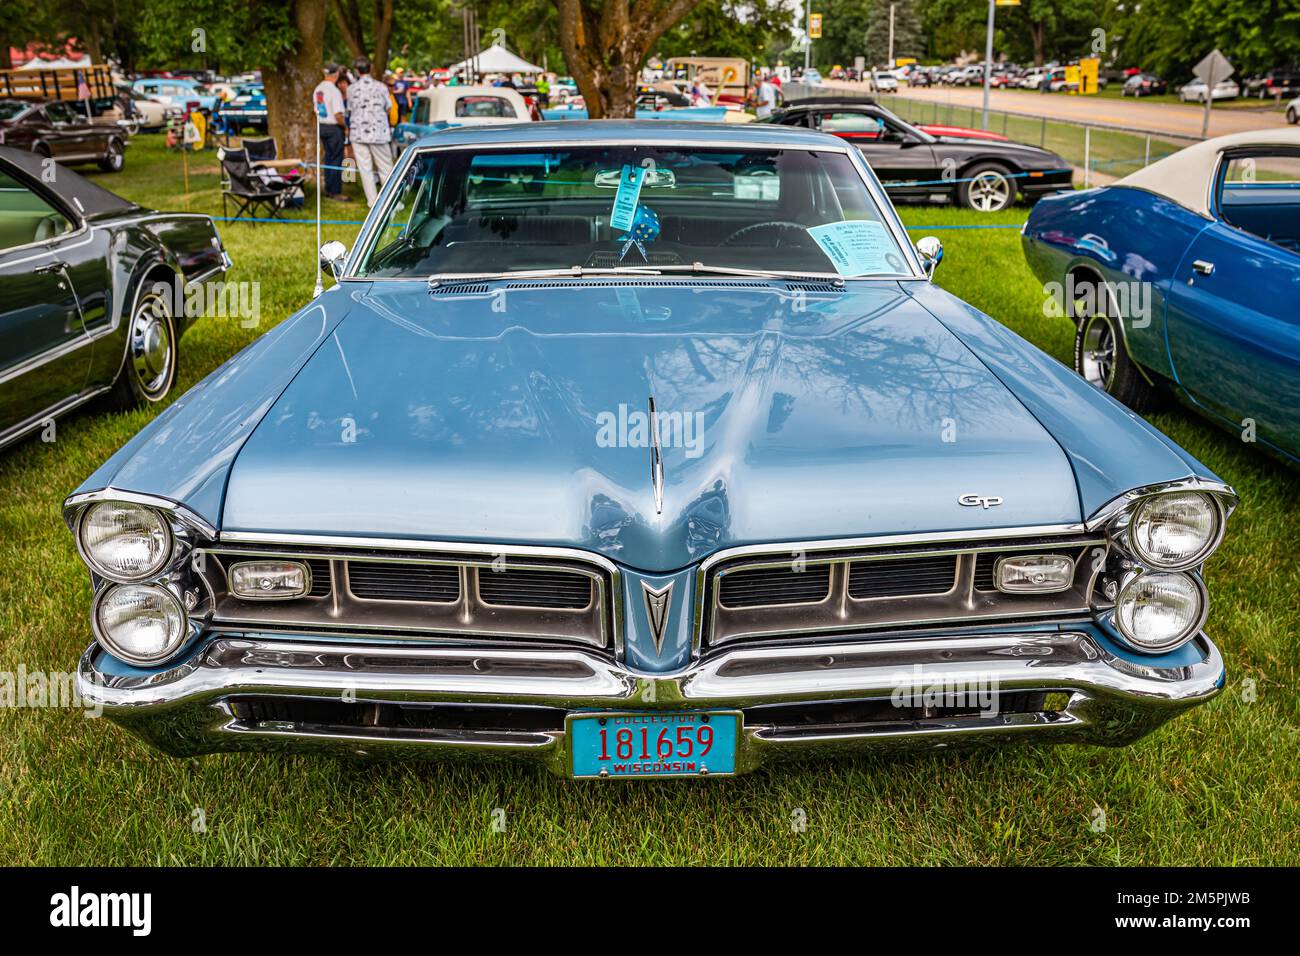 Iola, WI - July 07, 2022: High perspective front view of a 1965 Pontiac Grand Prix Hardtop Coupe at a local car show. Stock Photo